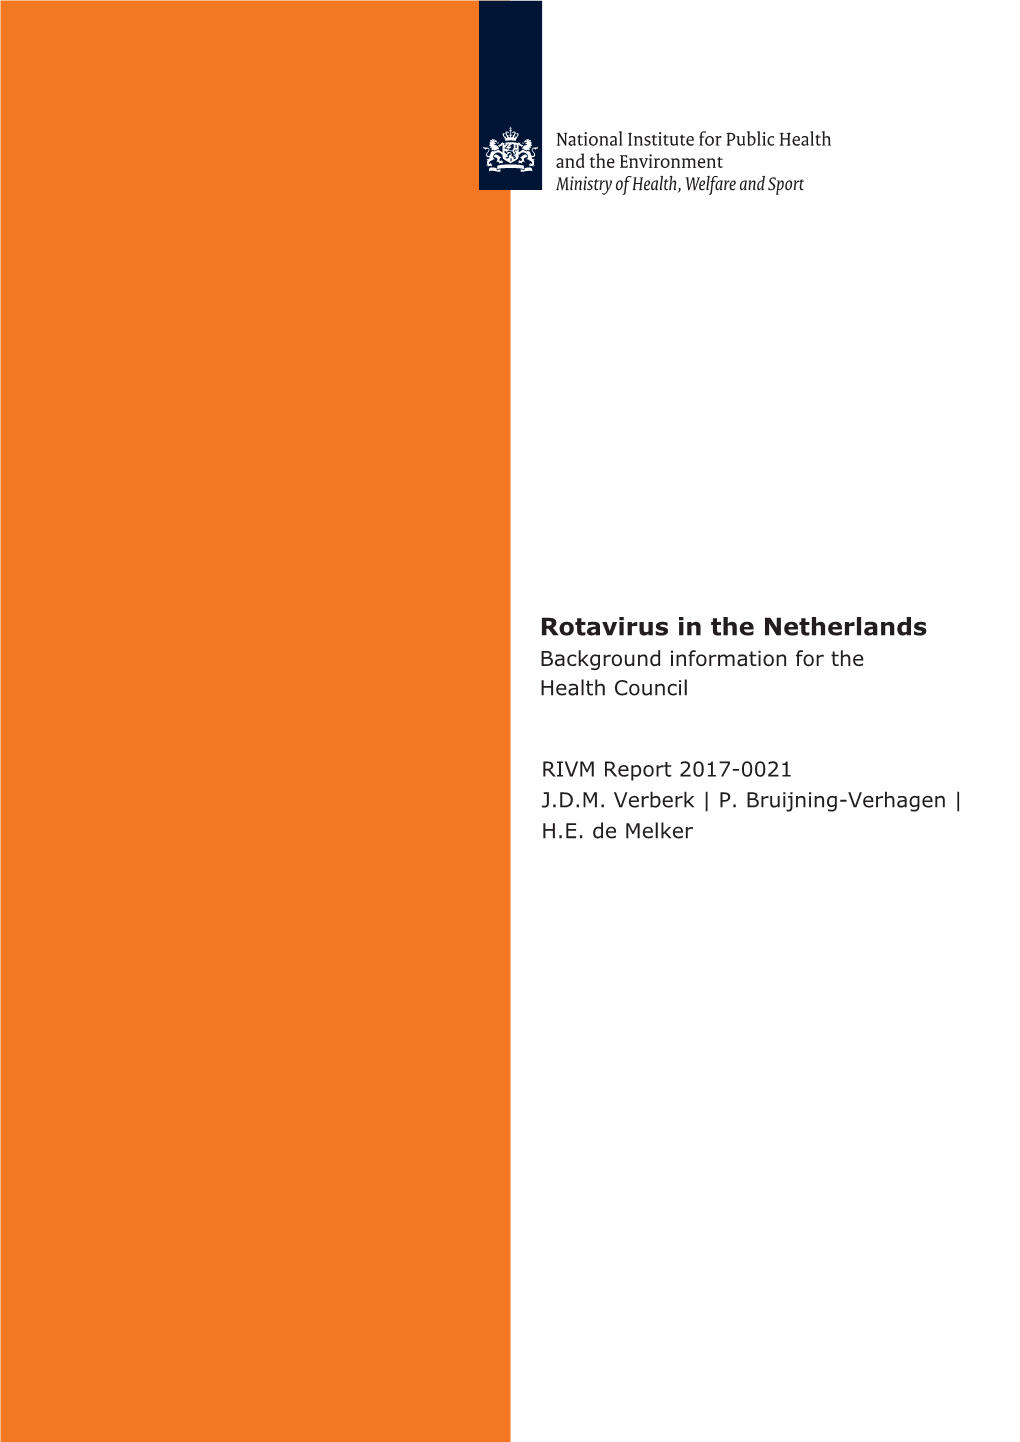 Rotavirus in the Netherlands Background Information for the Health Council